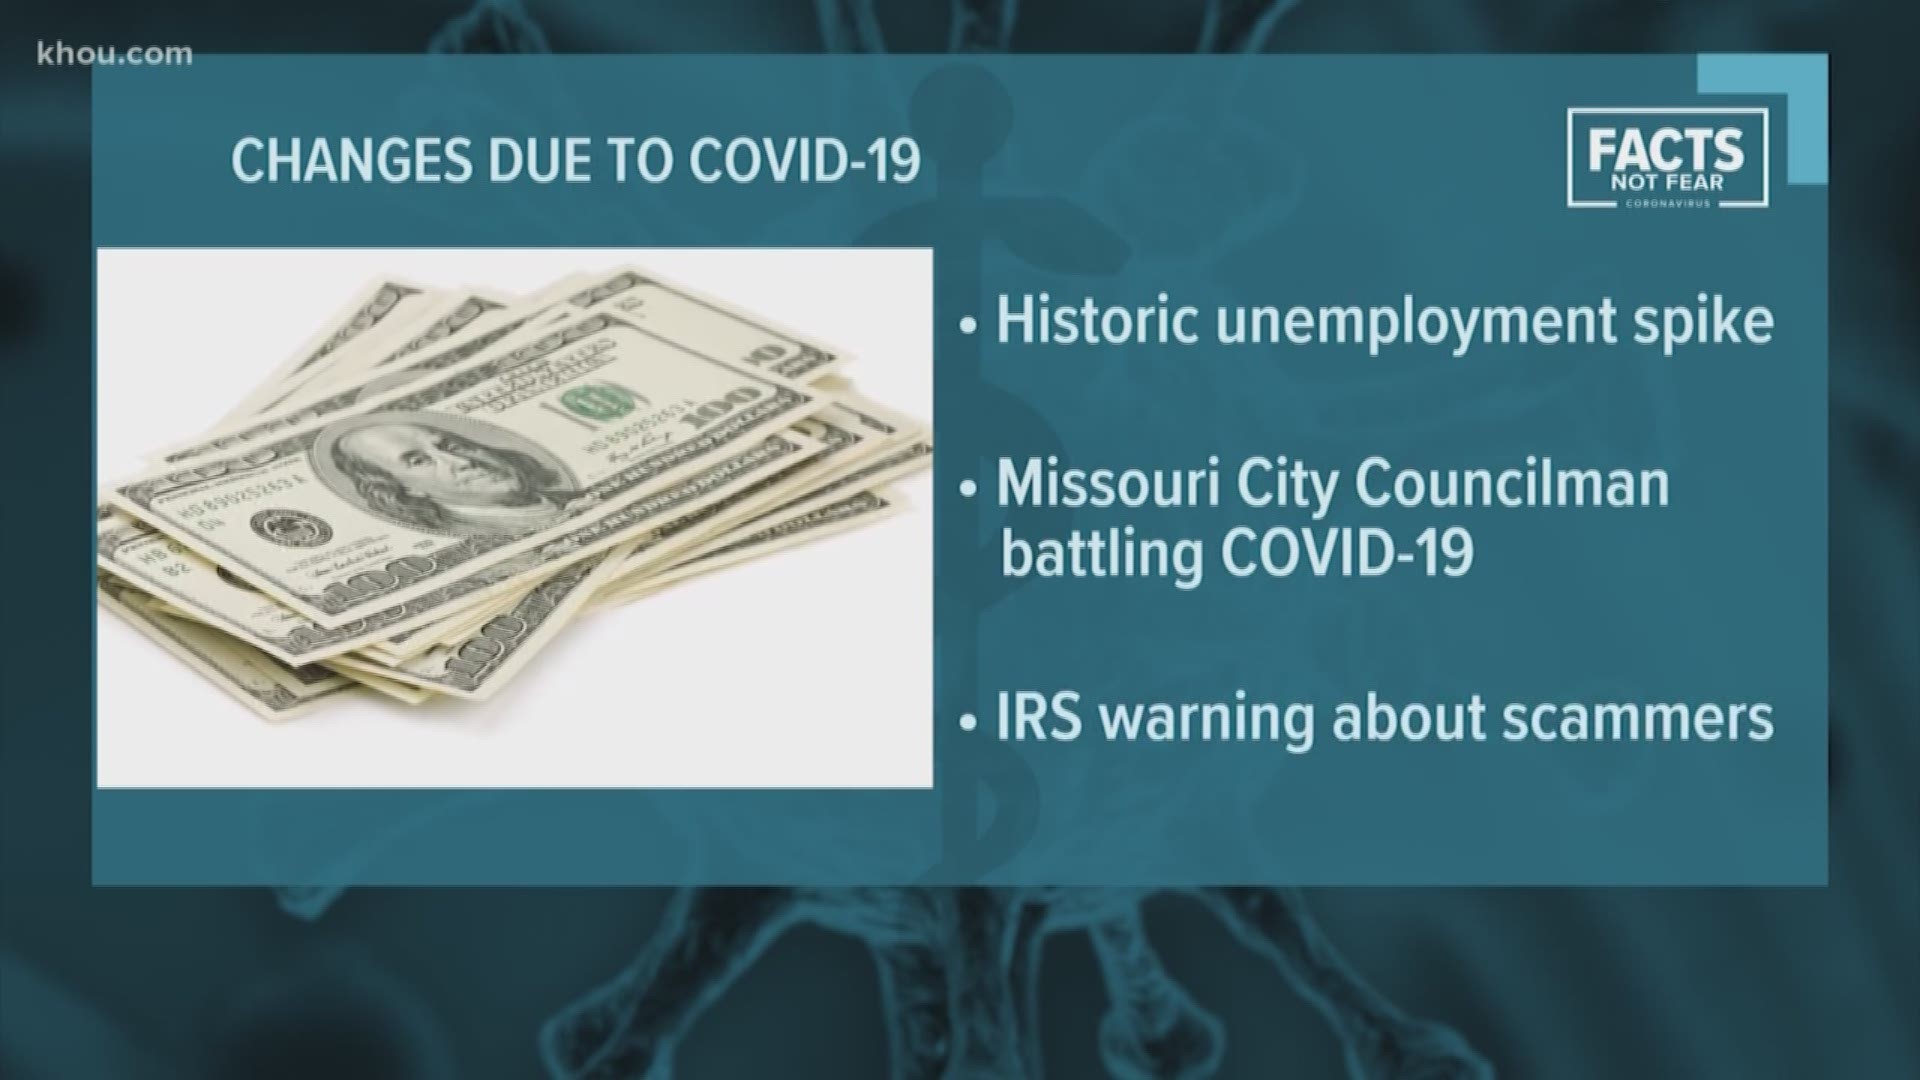 We take a look at the high unemployment spike due to the coronavirus pandemic and talk to a Missouri City councilman battling COVID-19.